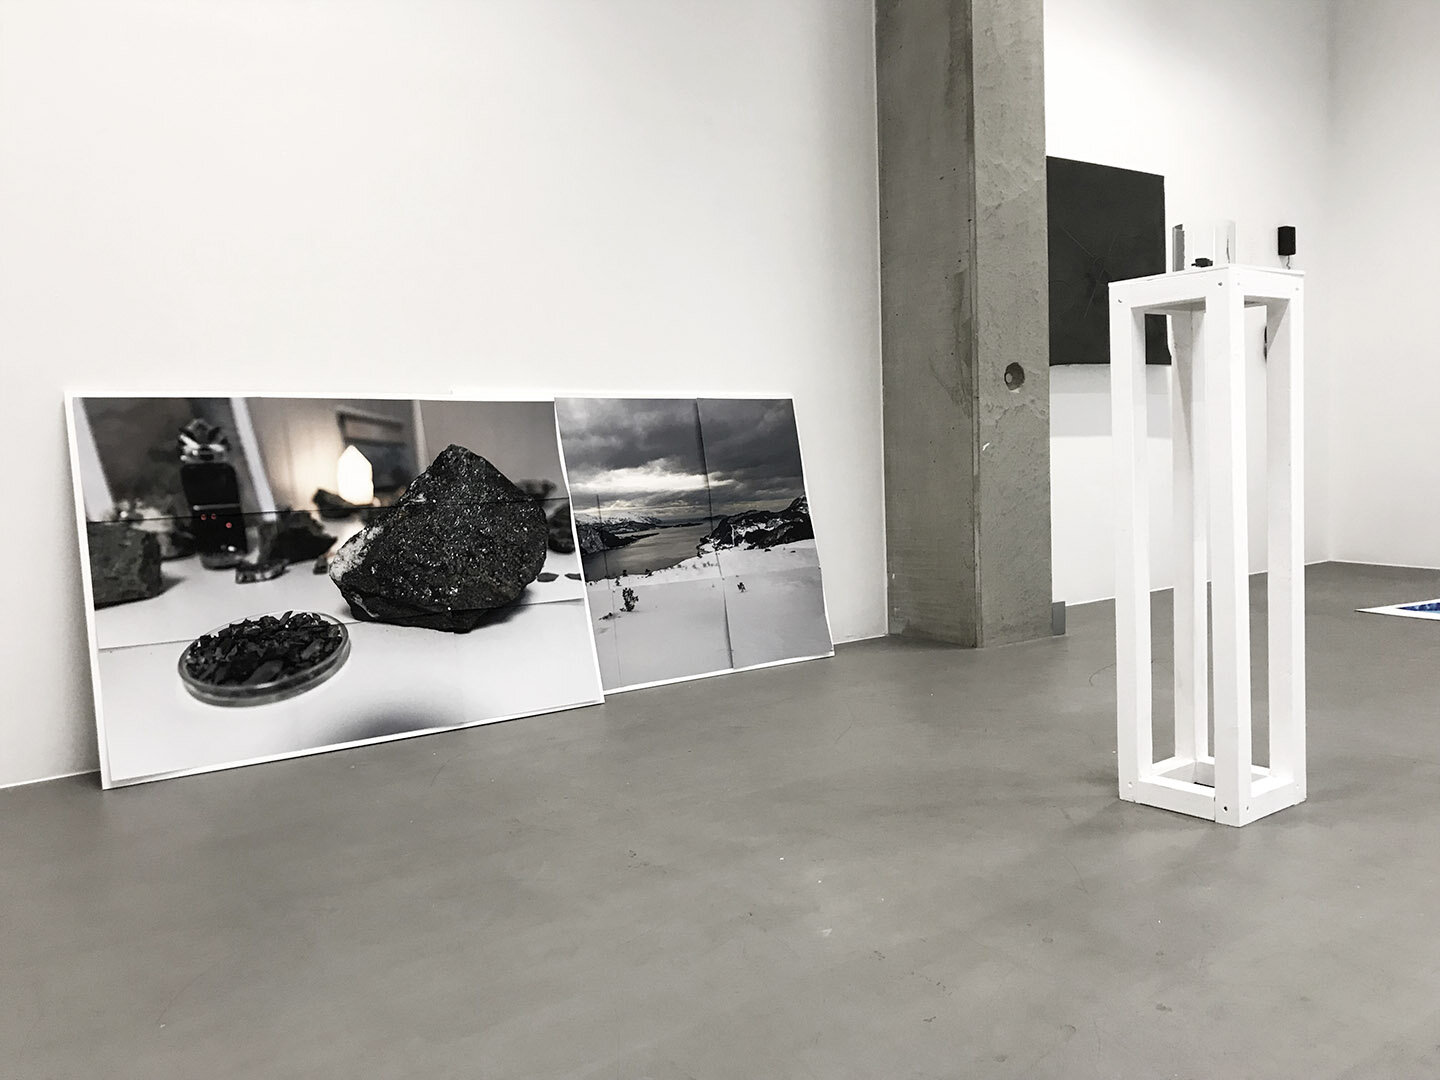   Remedium (2019)     Exhibited at ROM61, KMD, Bergen  Two images sliced into 9 pieces, 6-edge nut, hole puncher, wood. 120 x 88 cm. (x 2). Pedestal, glass dome, magnifier, rutile mineral sample. 150 x 20 x 20 cm. 